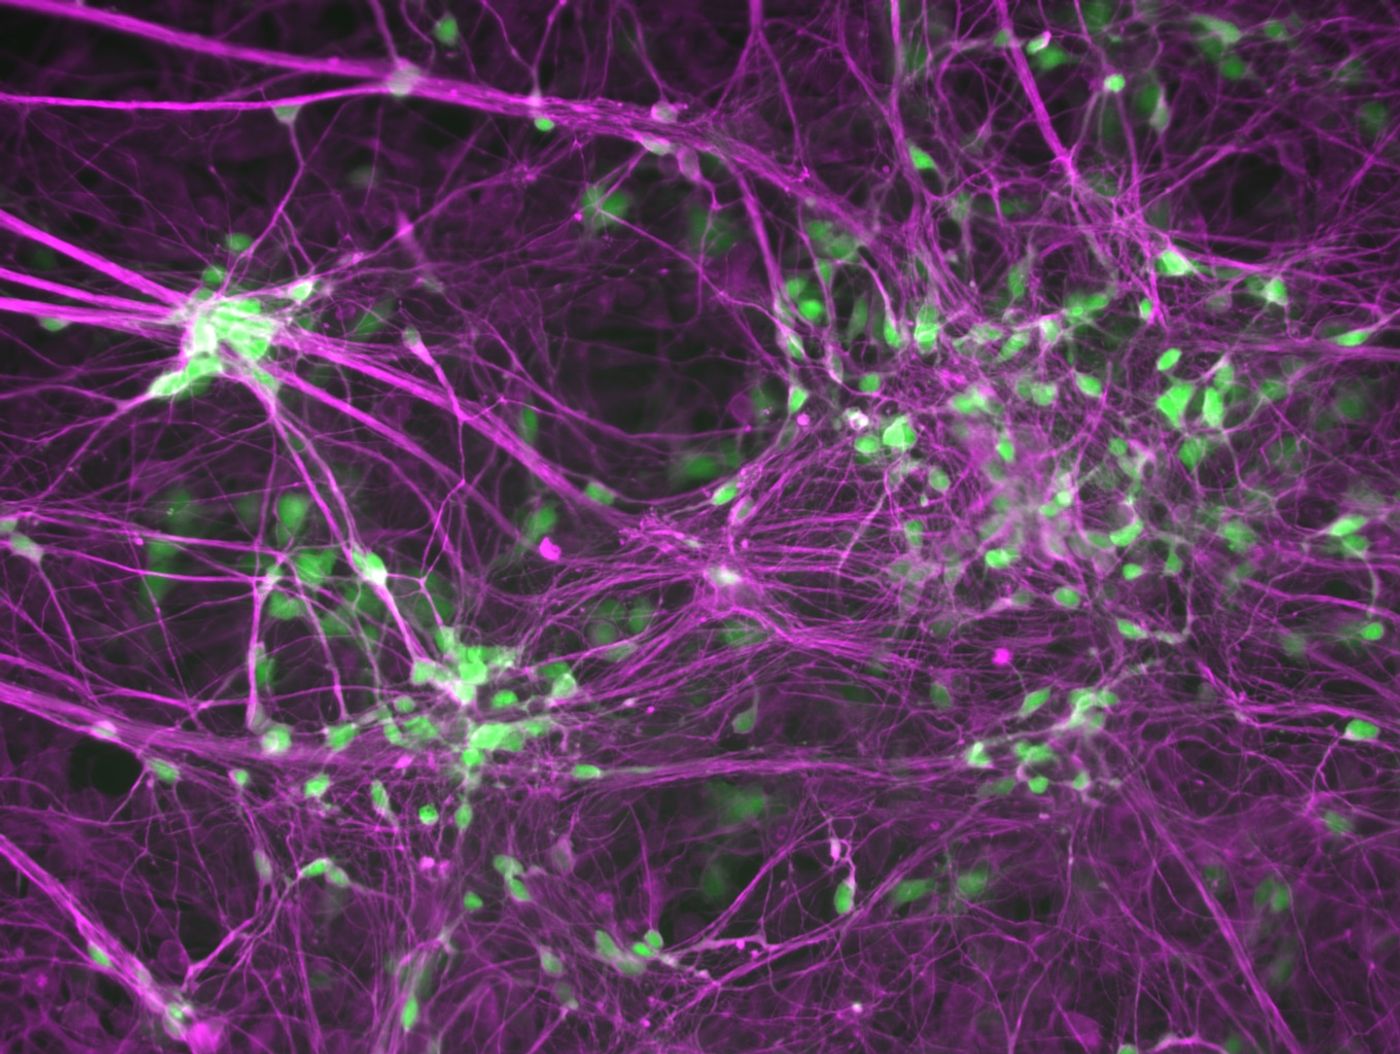 Image Credit Ichida Lab, Keck School of medicine of USC. Human-induced motor neurons that are labeled with a motor neuron marker HB9 in green and a neuron marker TUJ1 in purple.